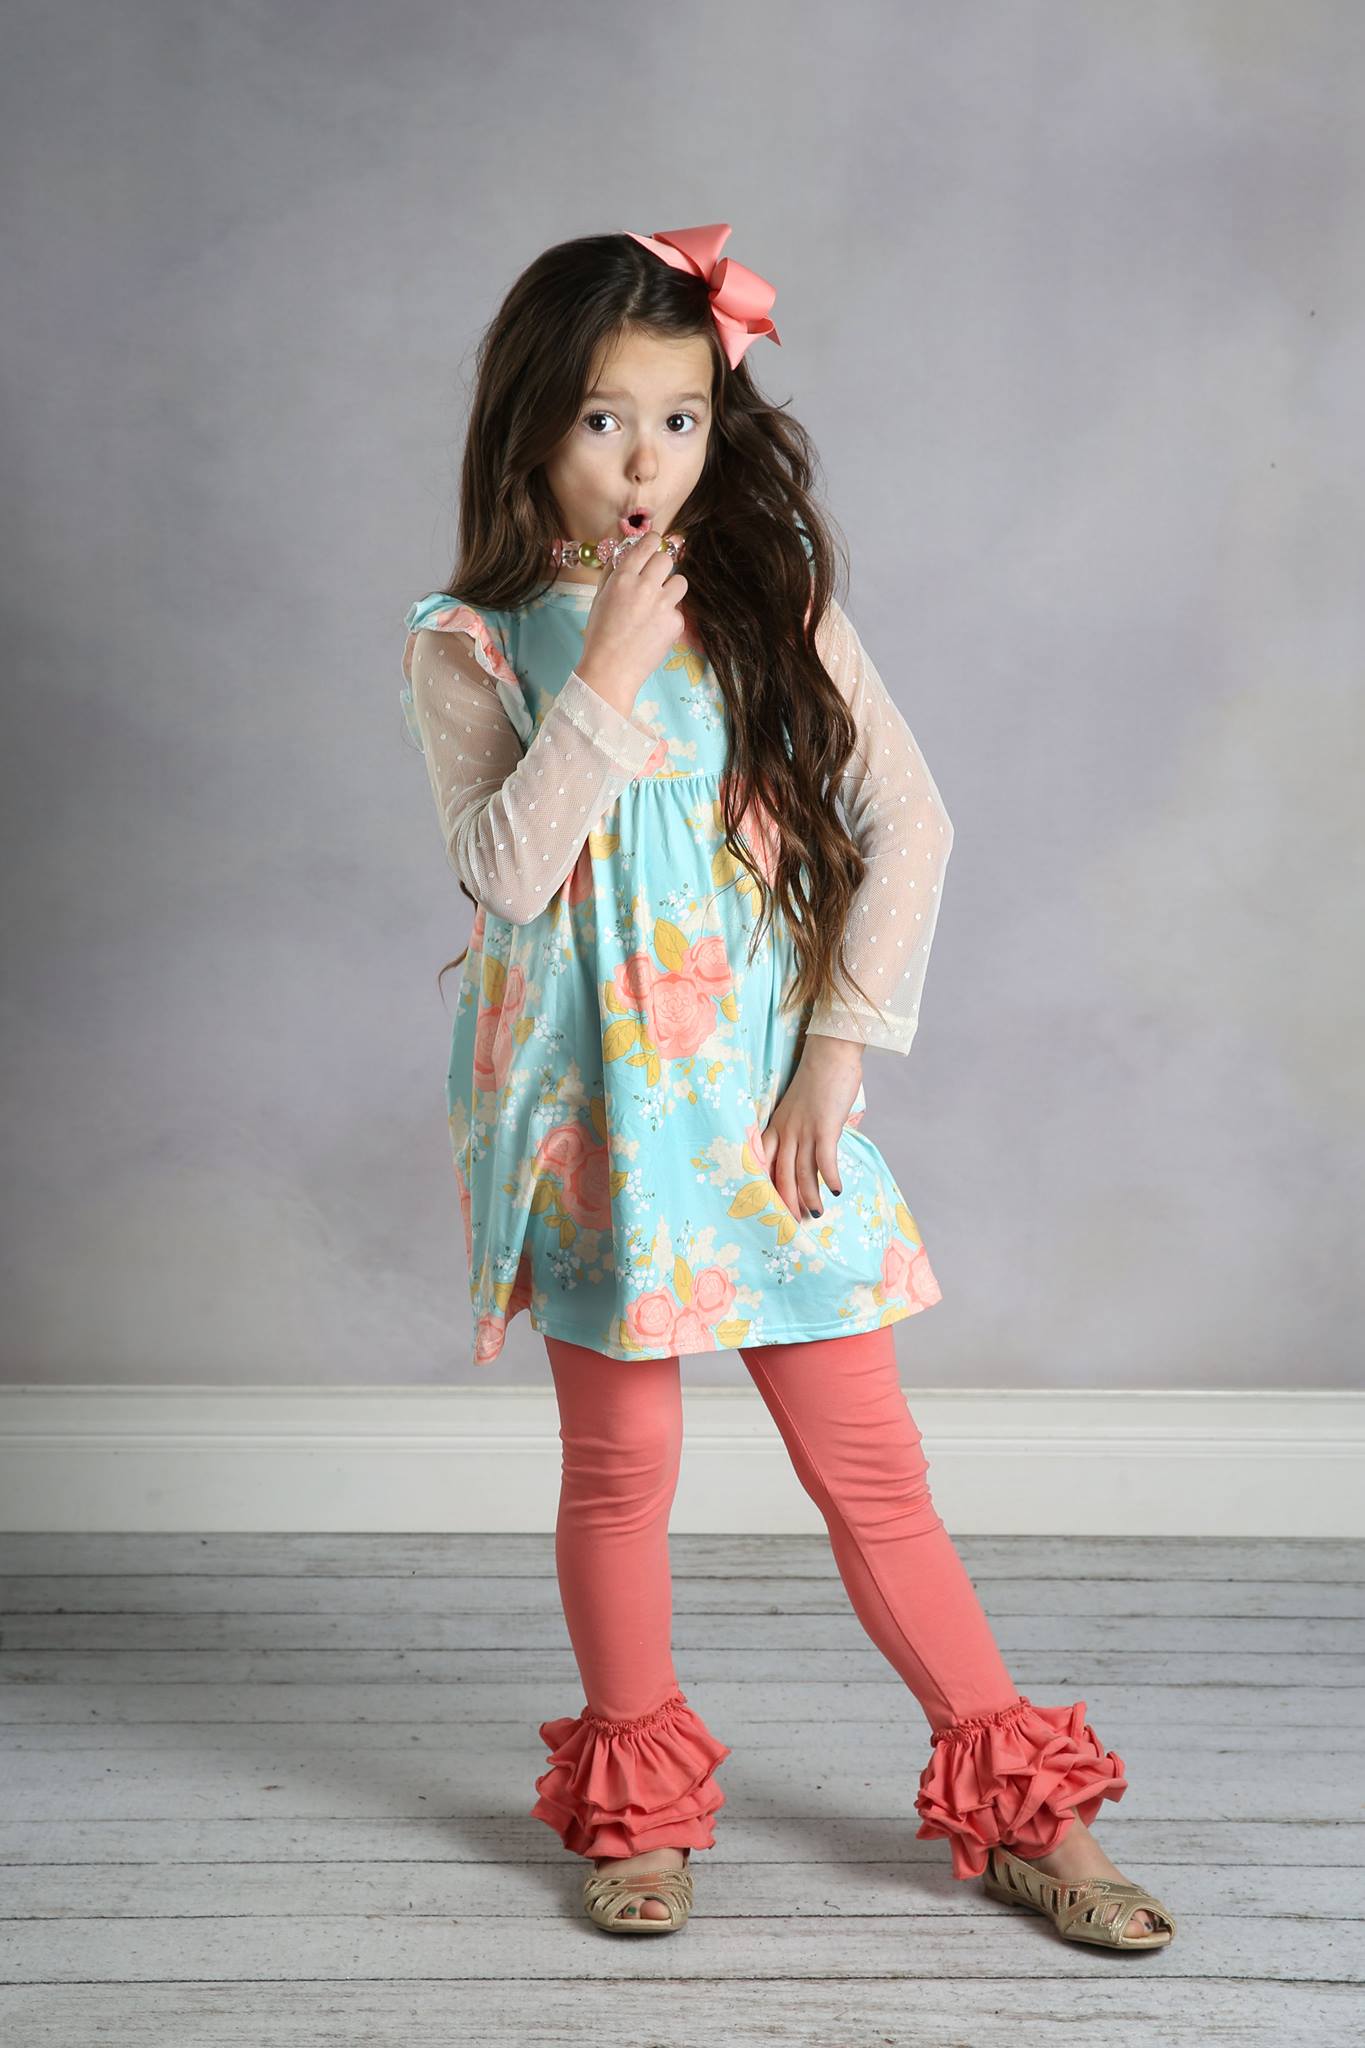 Bella Triple Ruffle Pants - Salmon - Pearls and Piggytails